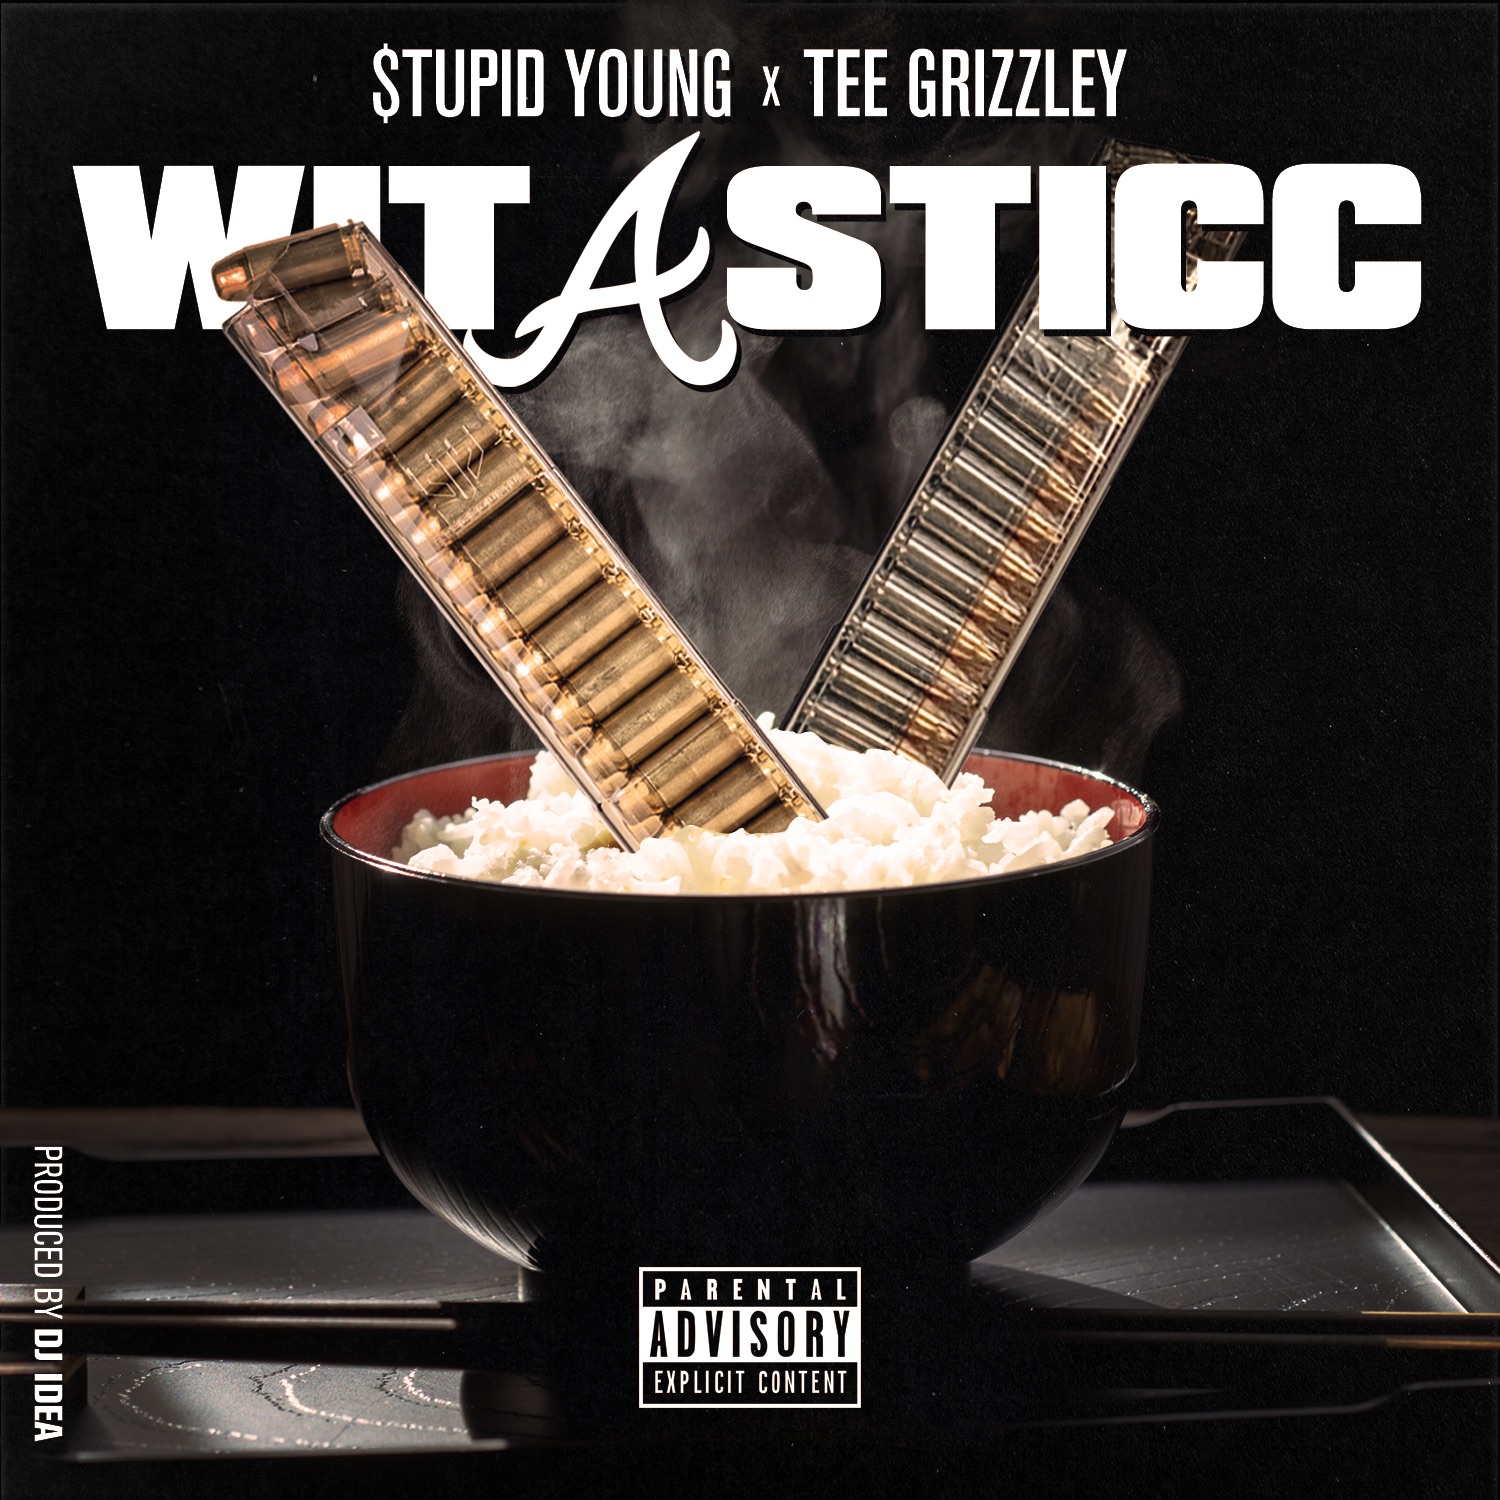 $tupid Young & Tee Grizzley - Wit a Sticc - Single